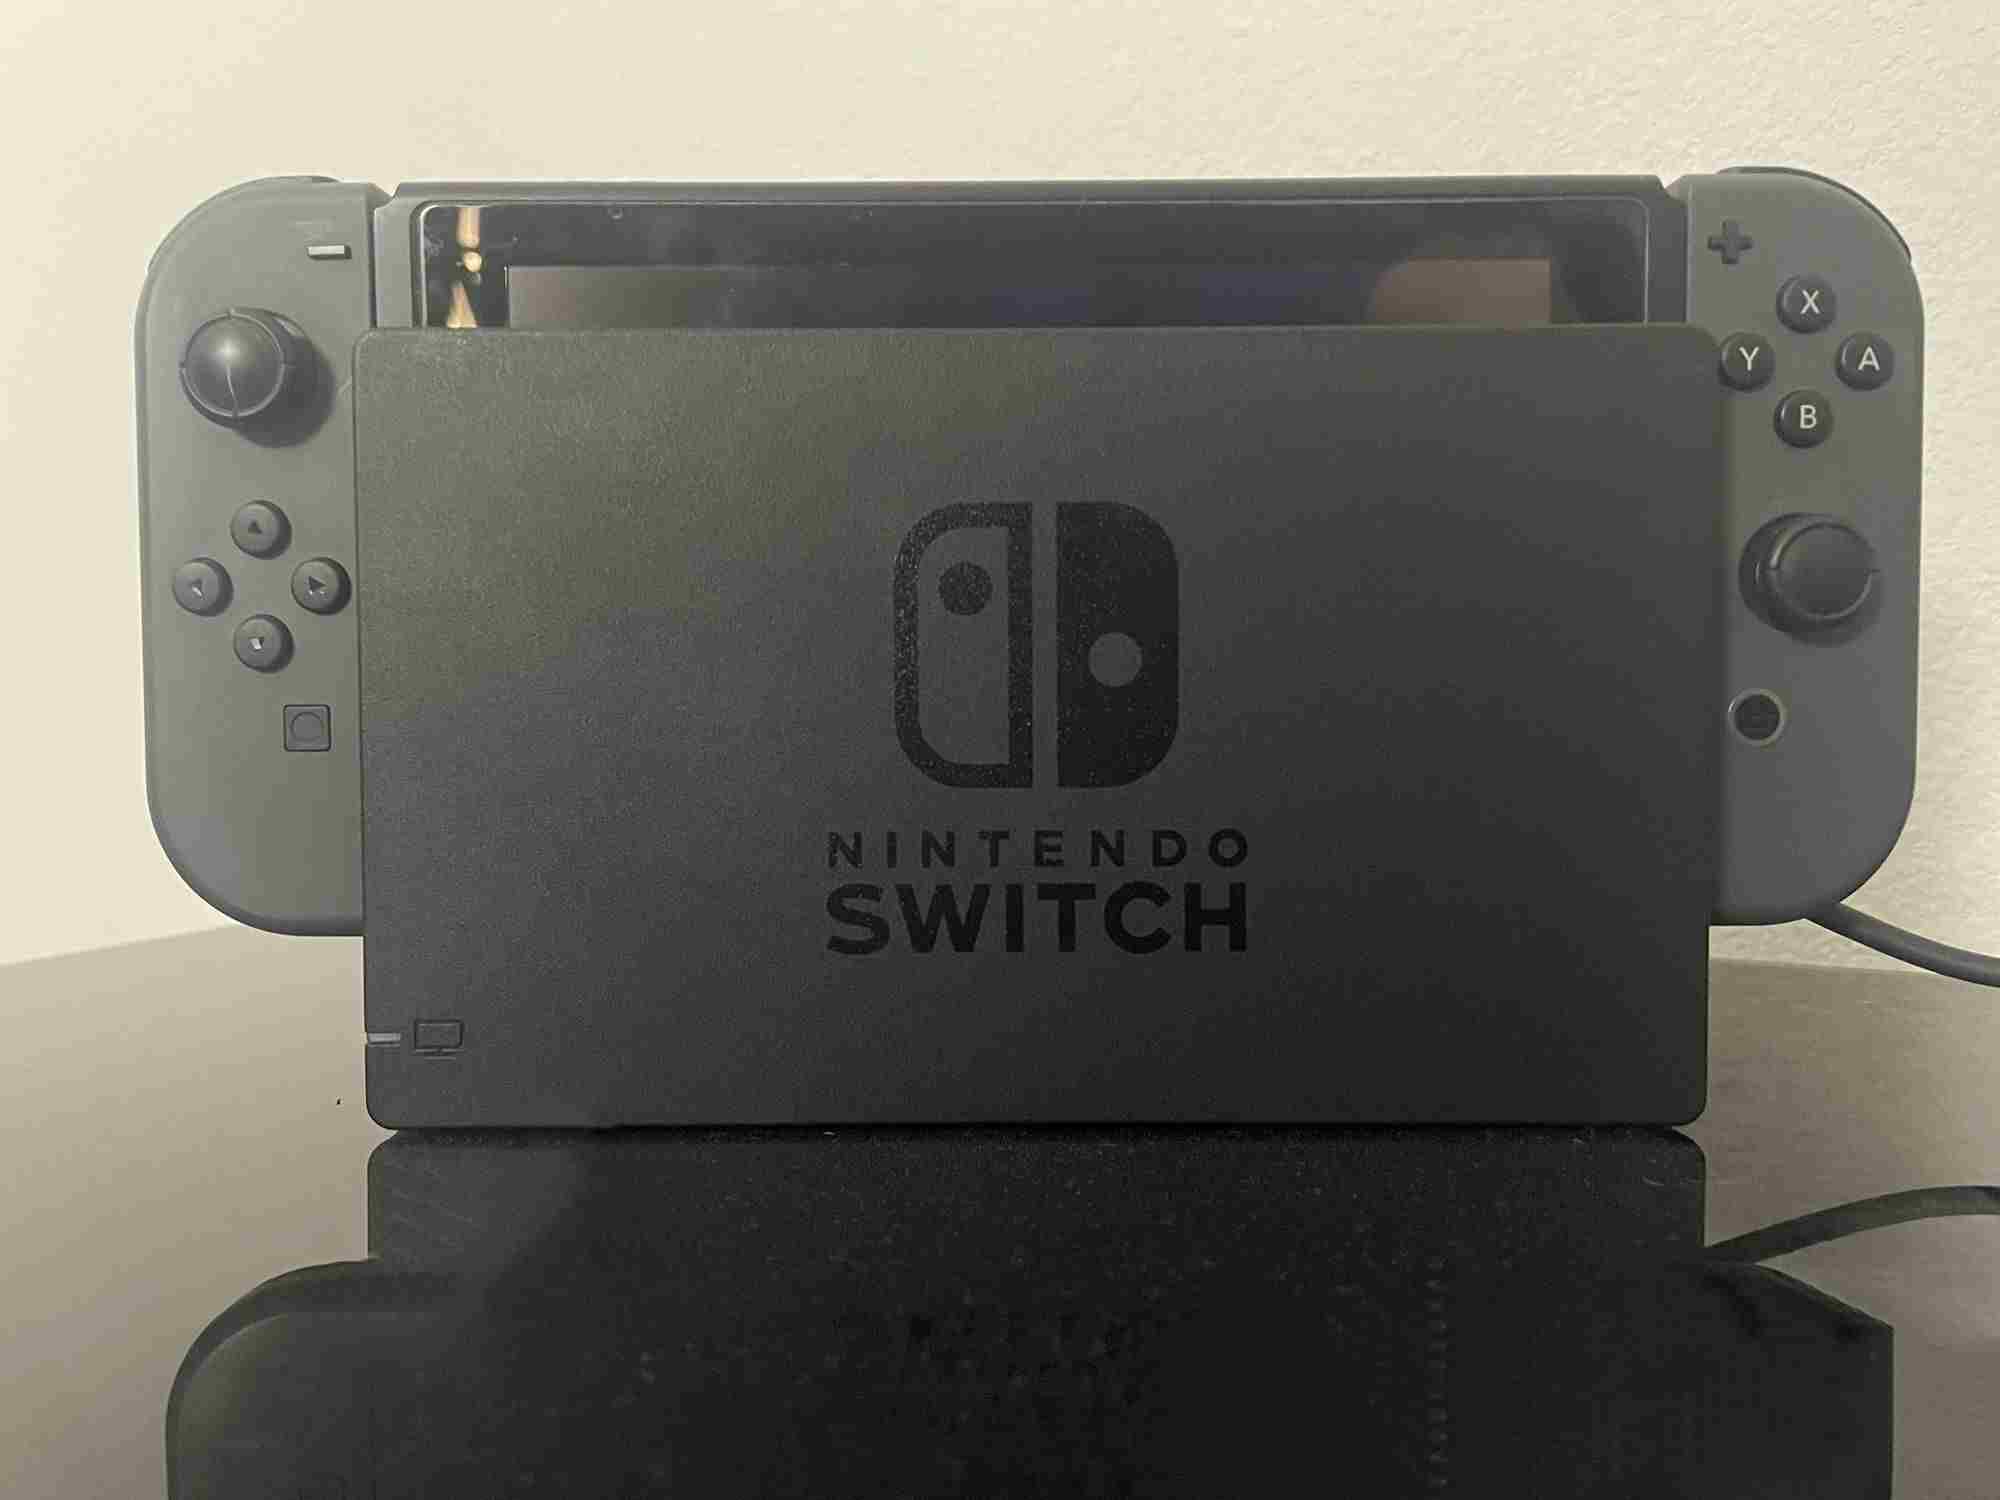 Charge Nintendo Switch controllers using the dock